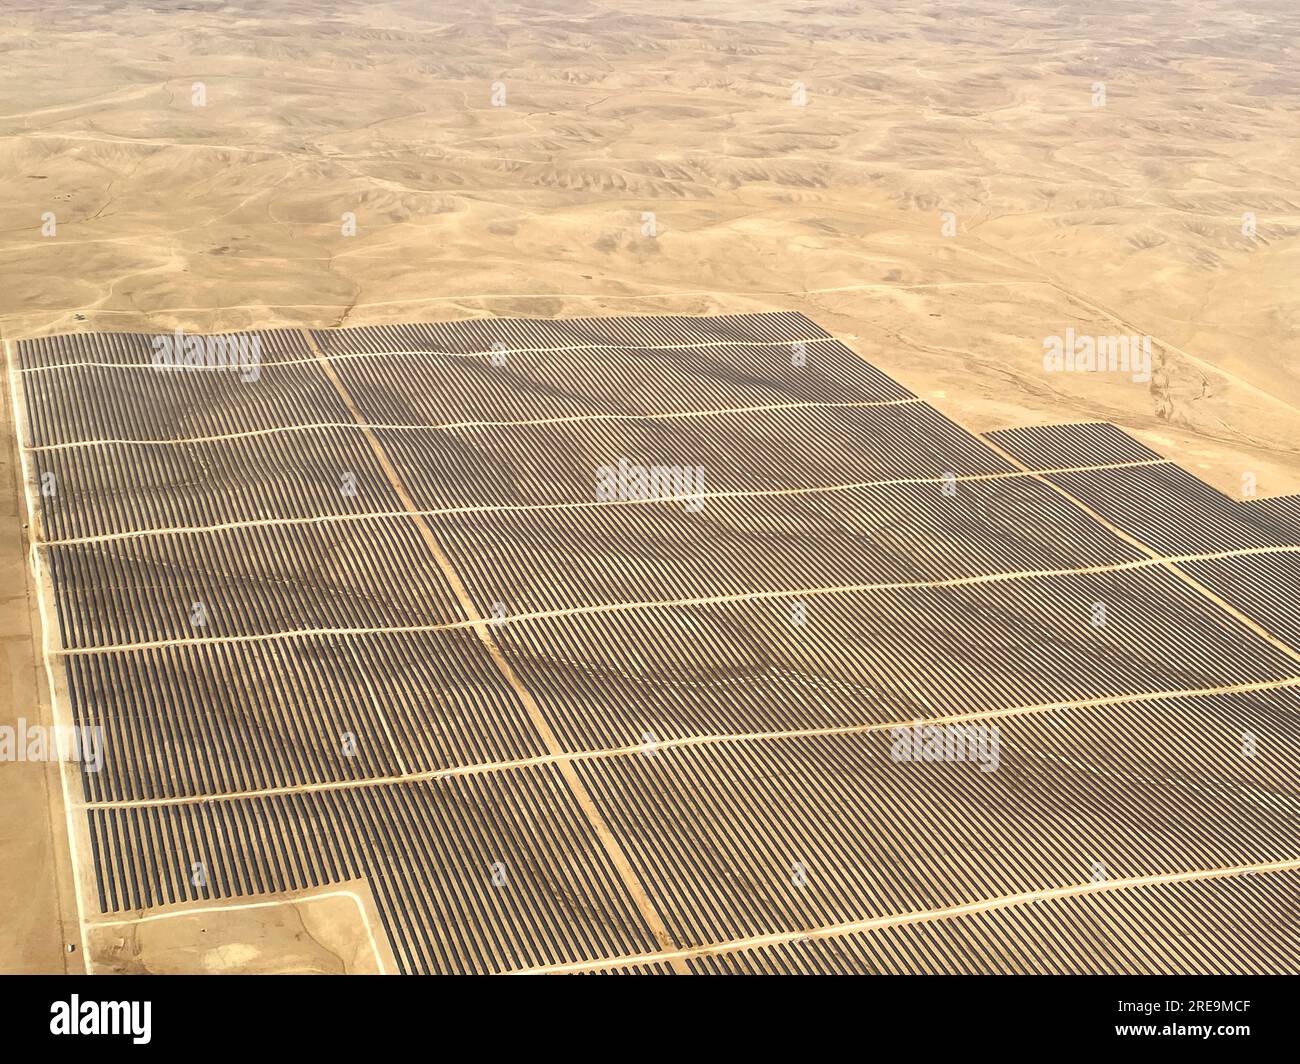 Very big energy system in the desert to produce electricity Stock Photo